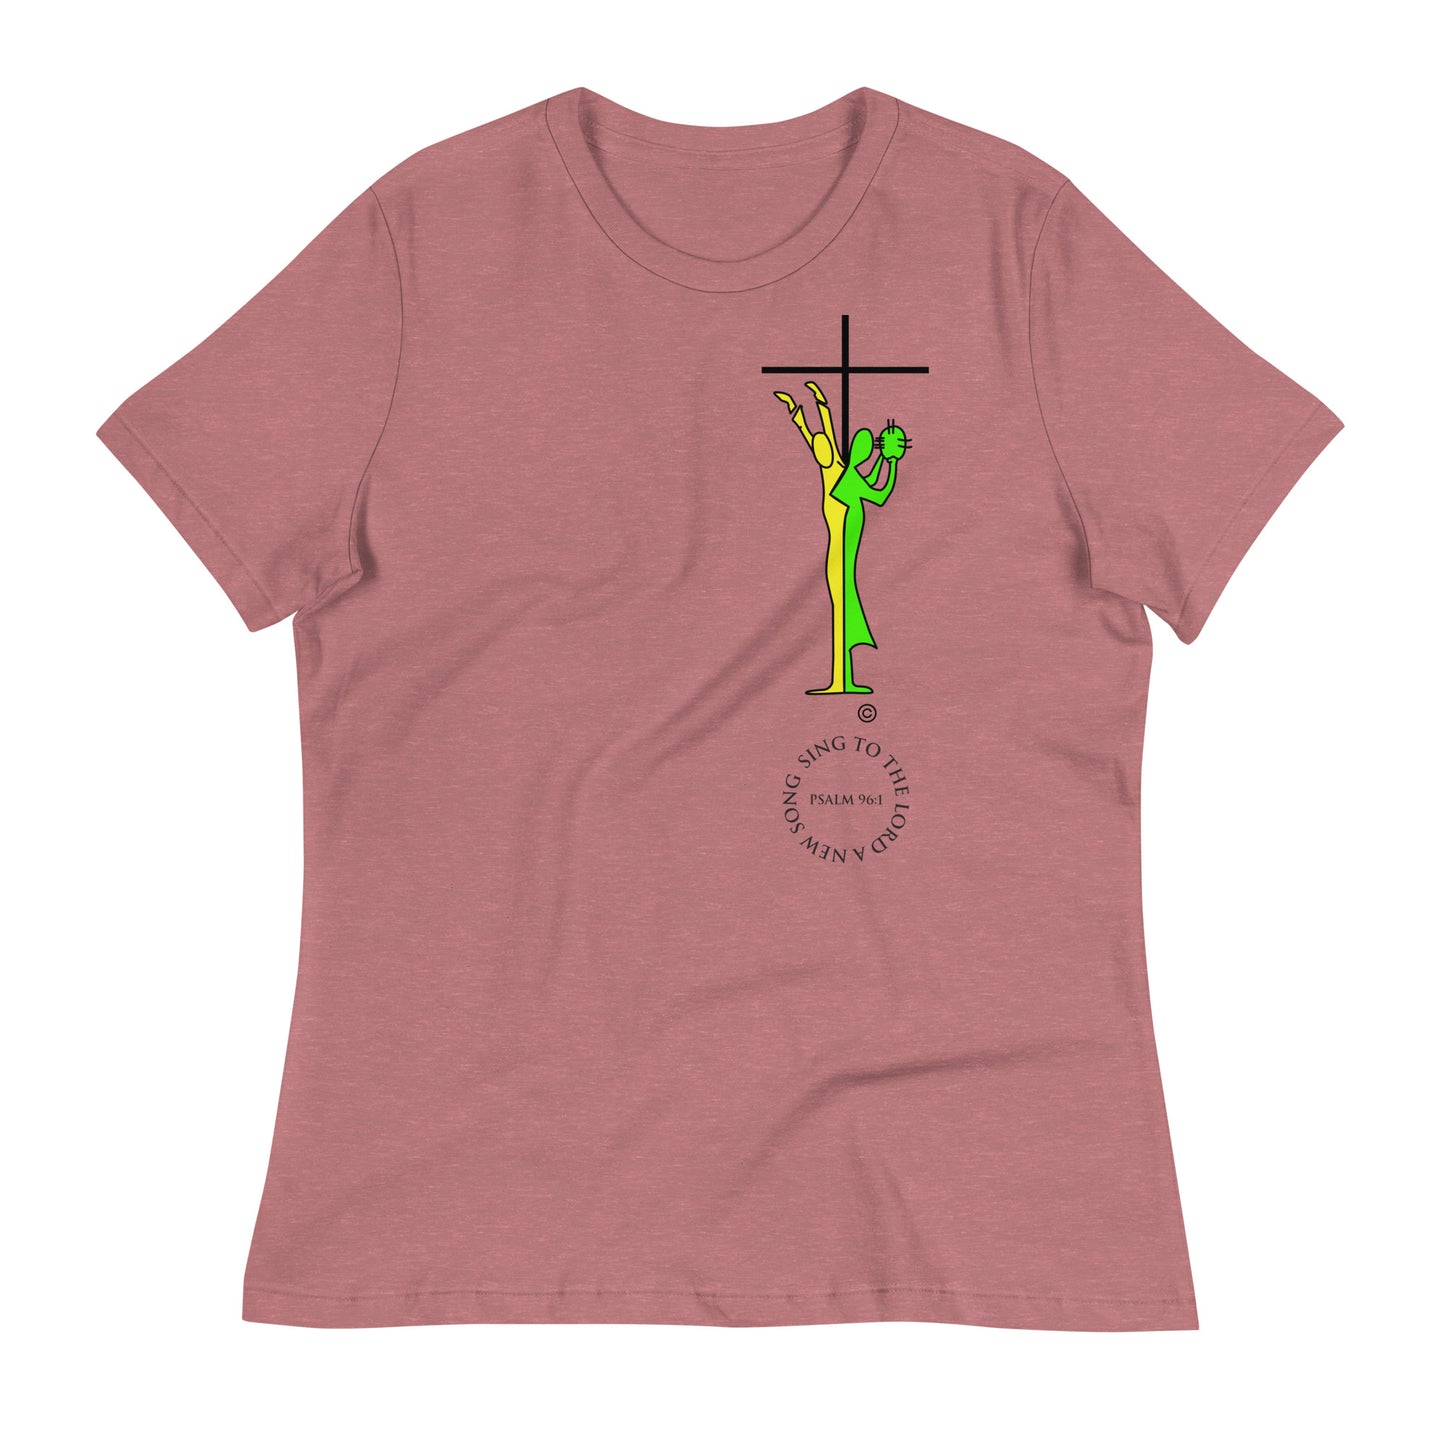 Sing to the Lord Women's Relaxed T-Shirt